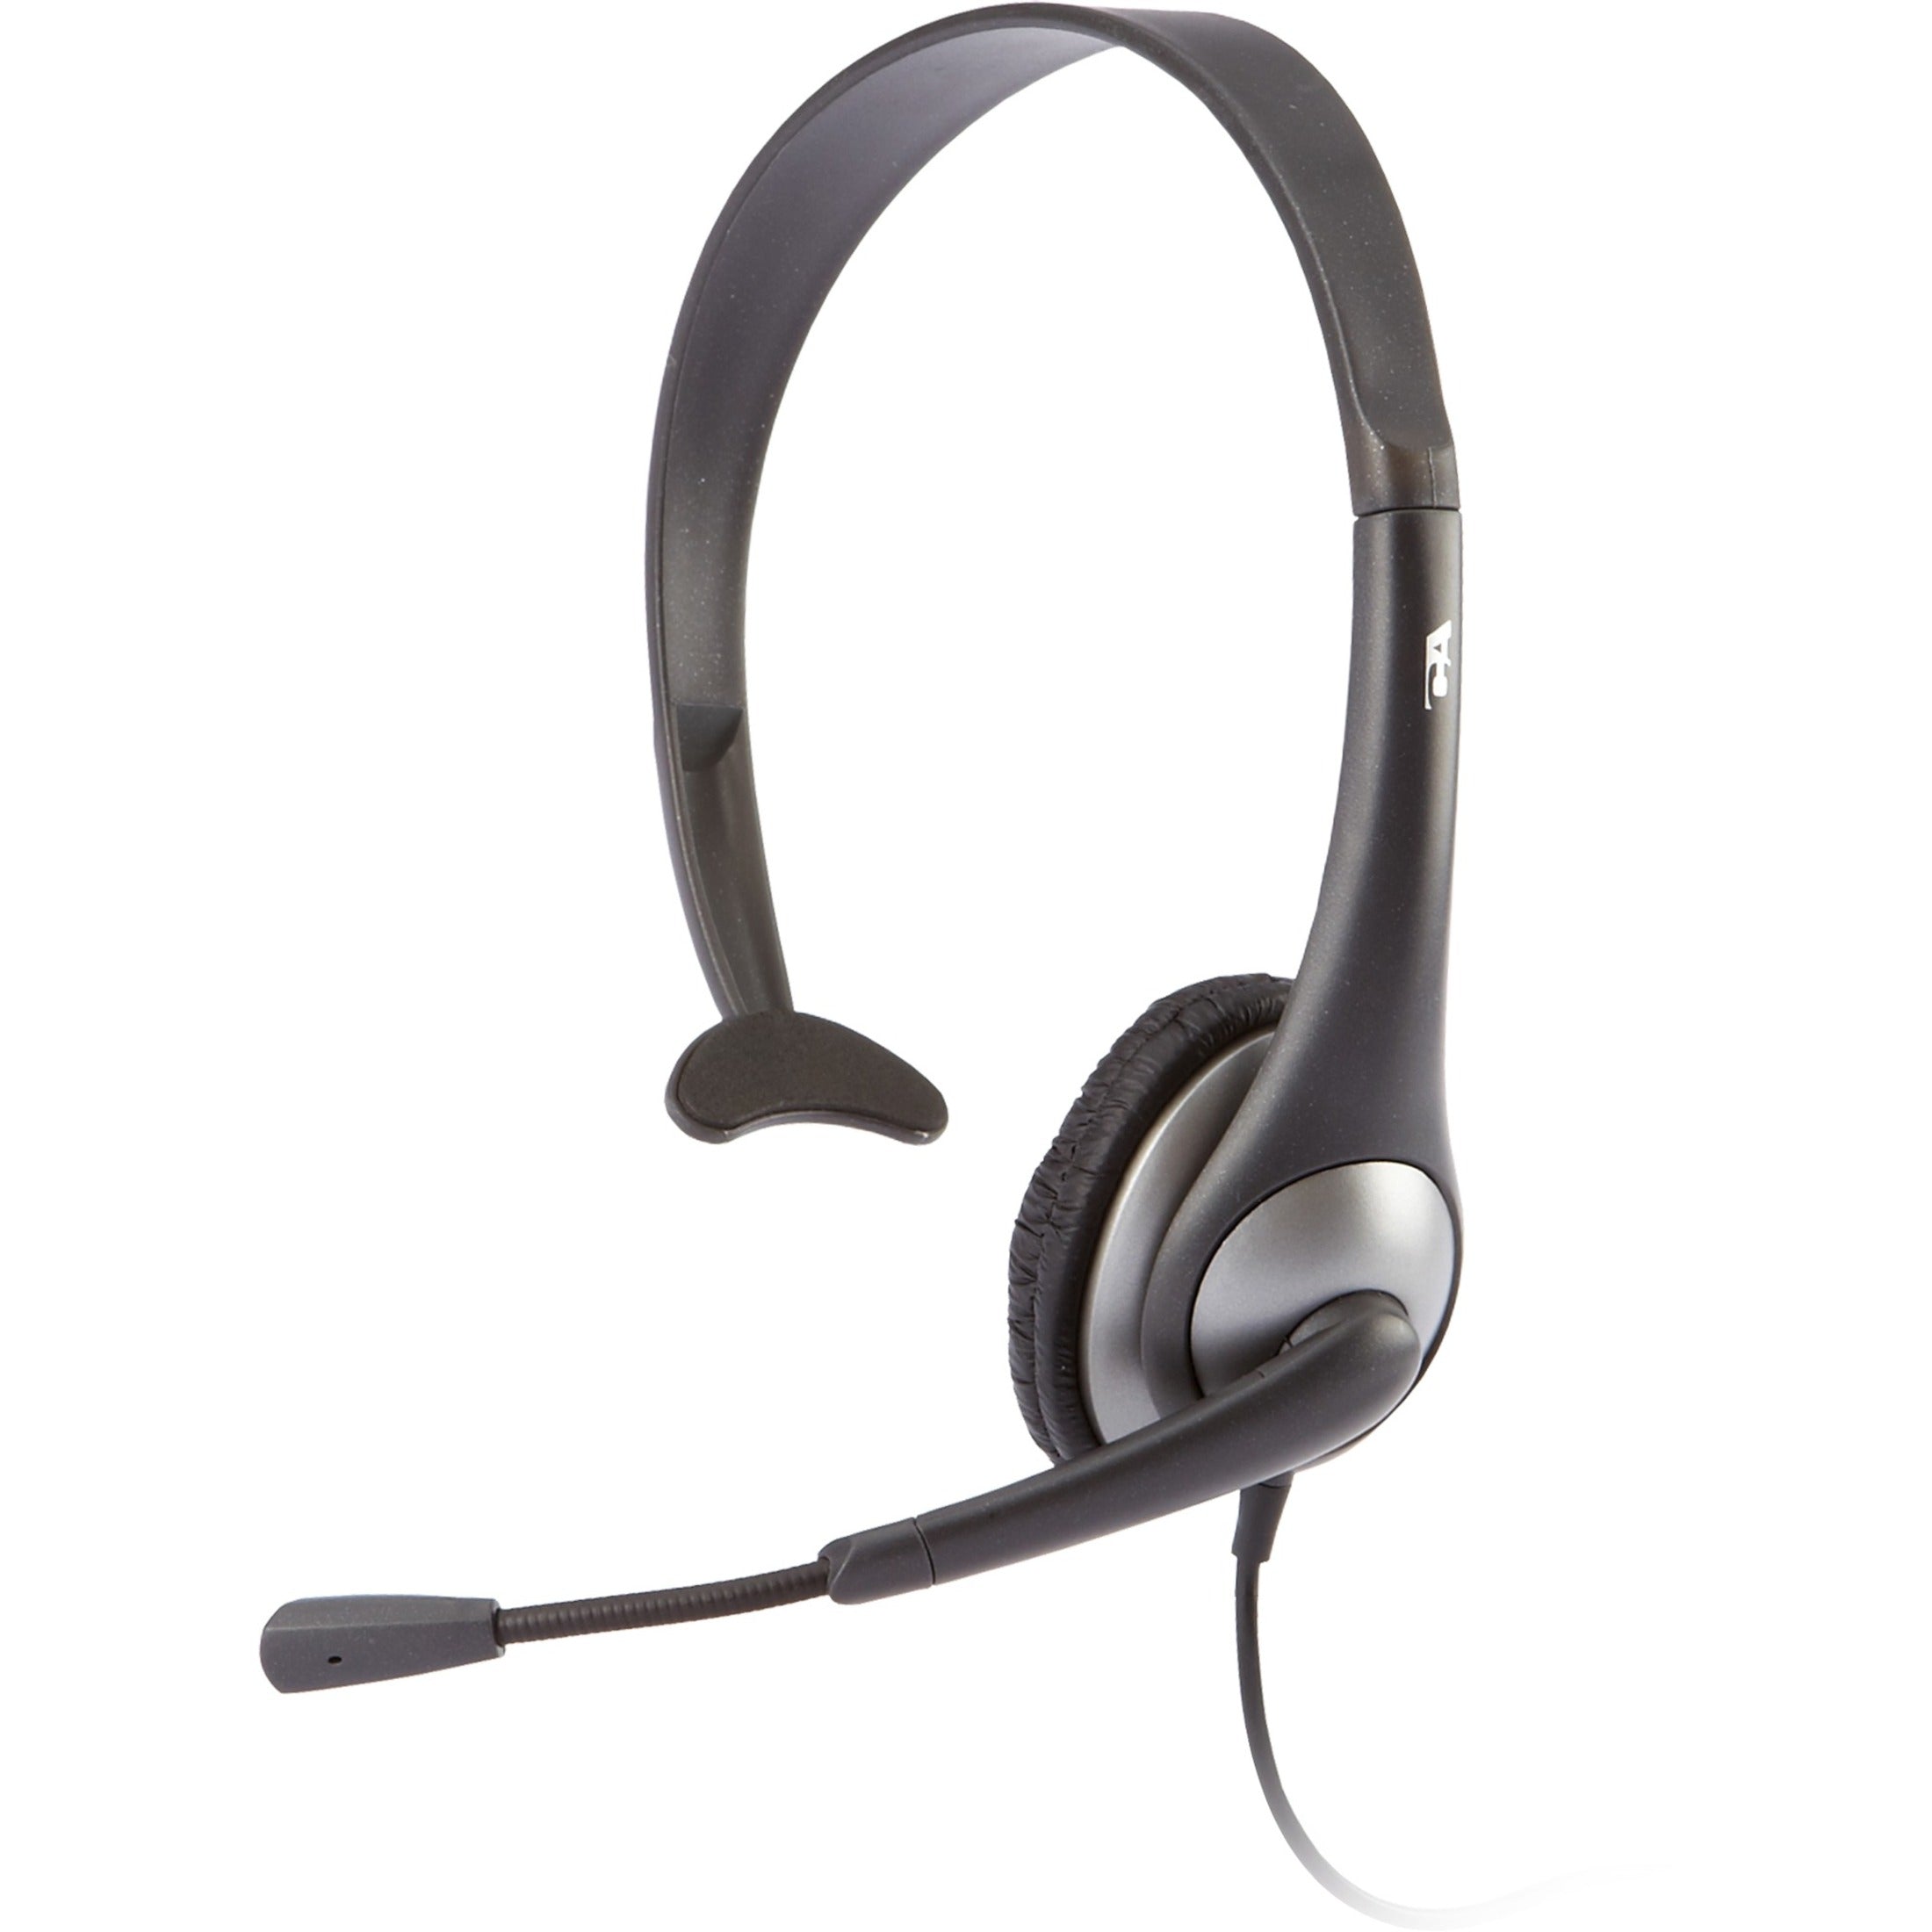 Cyber Acoustics AC-104 Headset, Over-the-head Monaural Headset with Boom Microphone, Noise Cancelling, Adjustable Headband